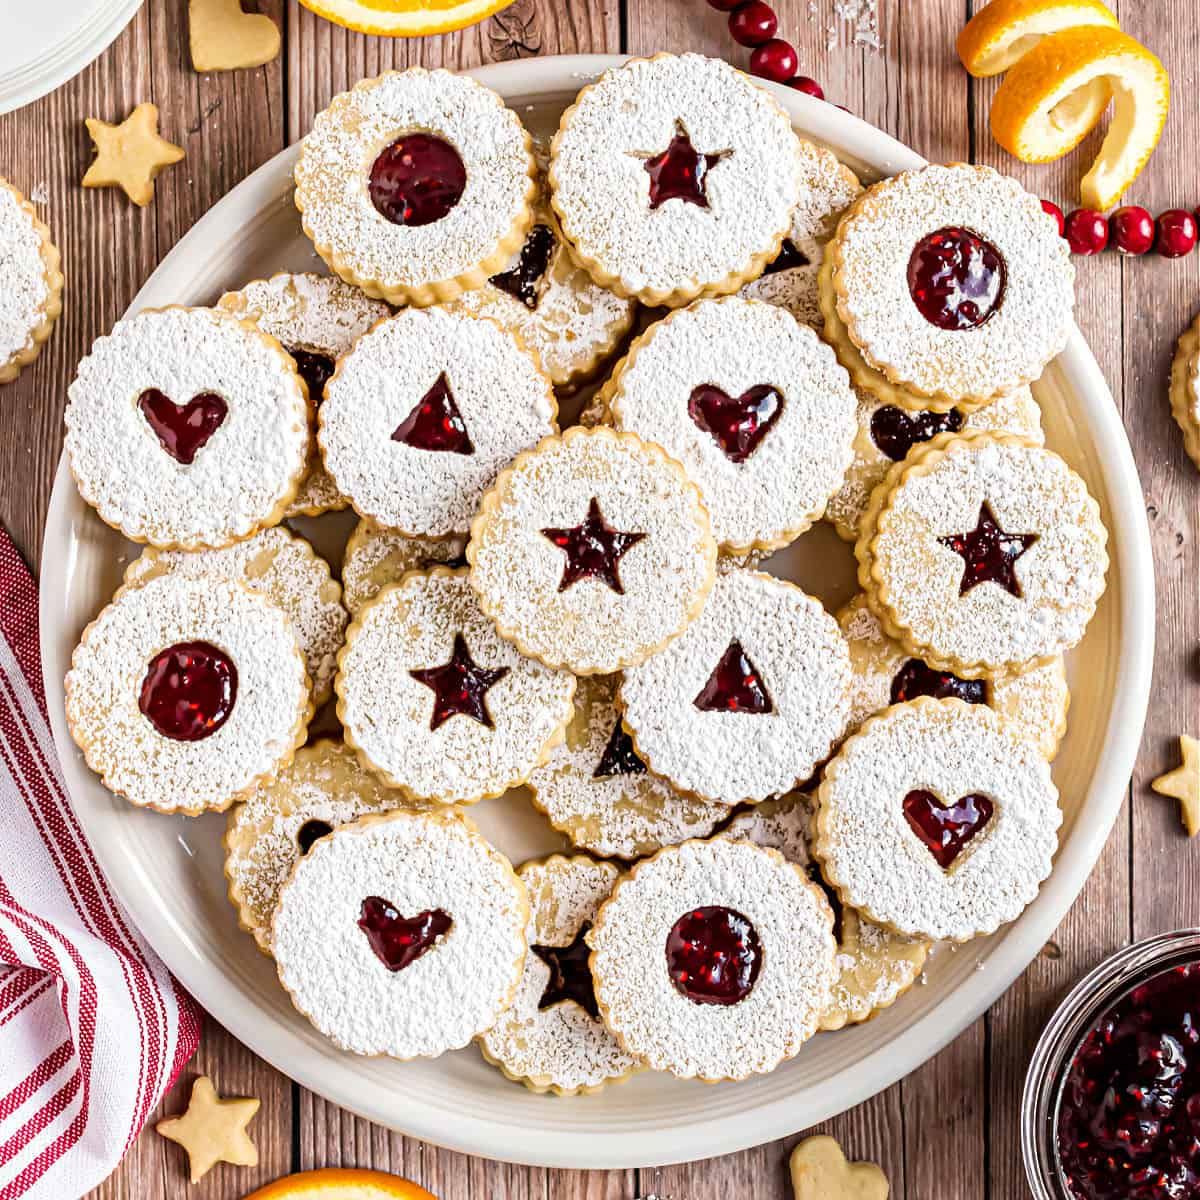 How To Store Linzer Cookies